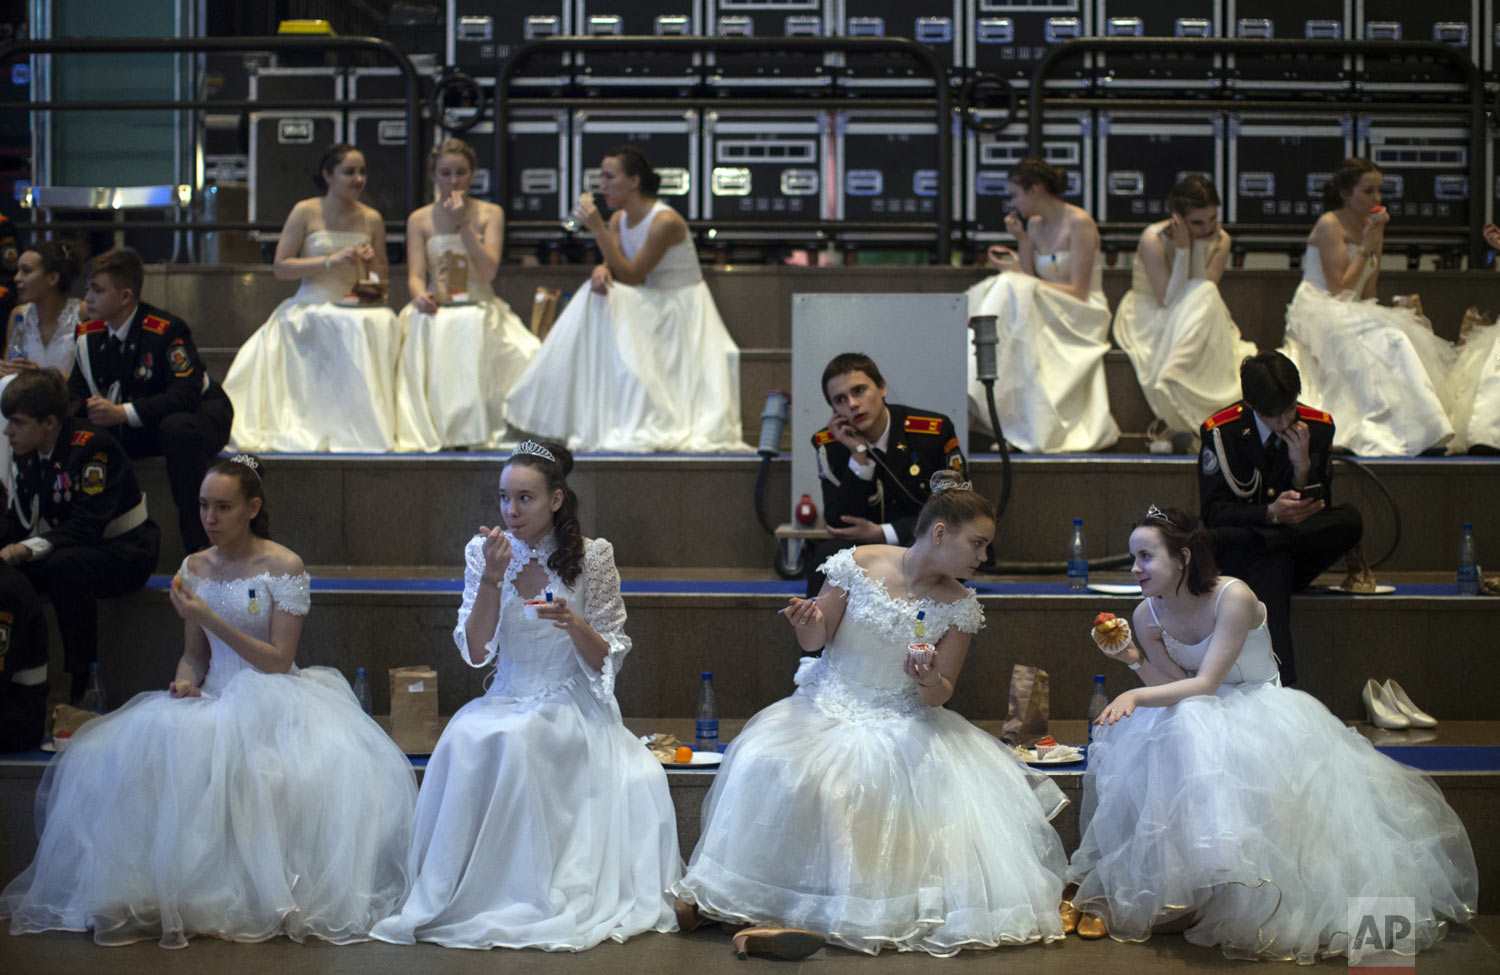  Military school students sit backstage during an annual ball in Moscow, Russia, Tuesday, Dec. 11, 2018. In a revival of a czarist tradition, more than 1,000 students both from military and general schools travelled to the capital from across the cou